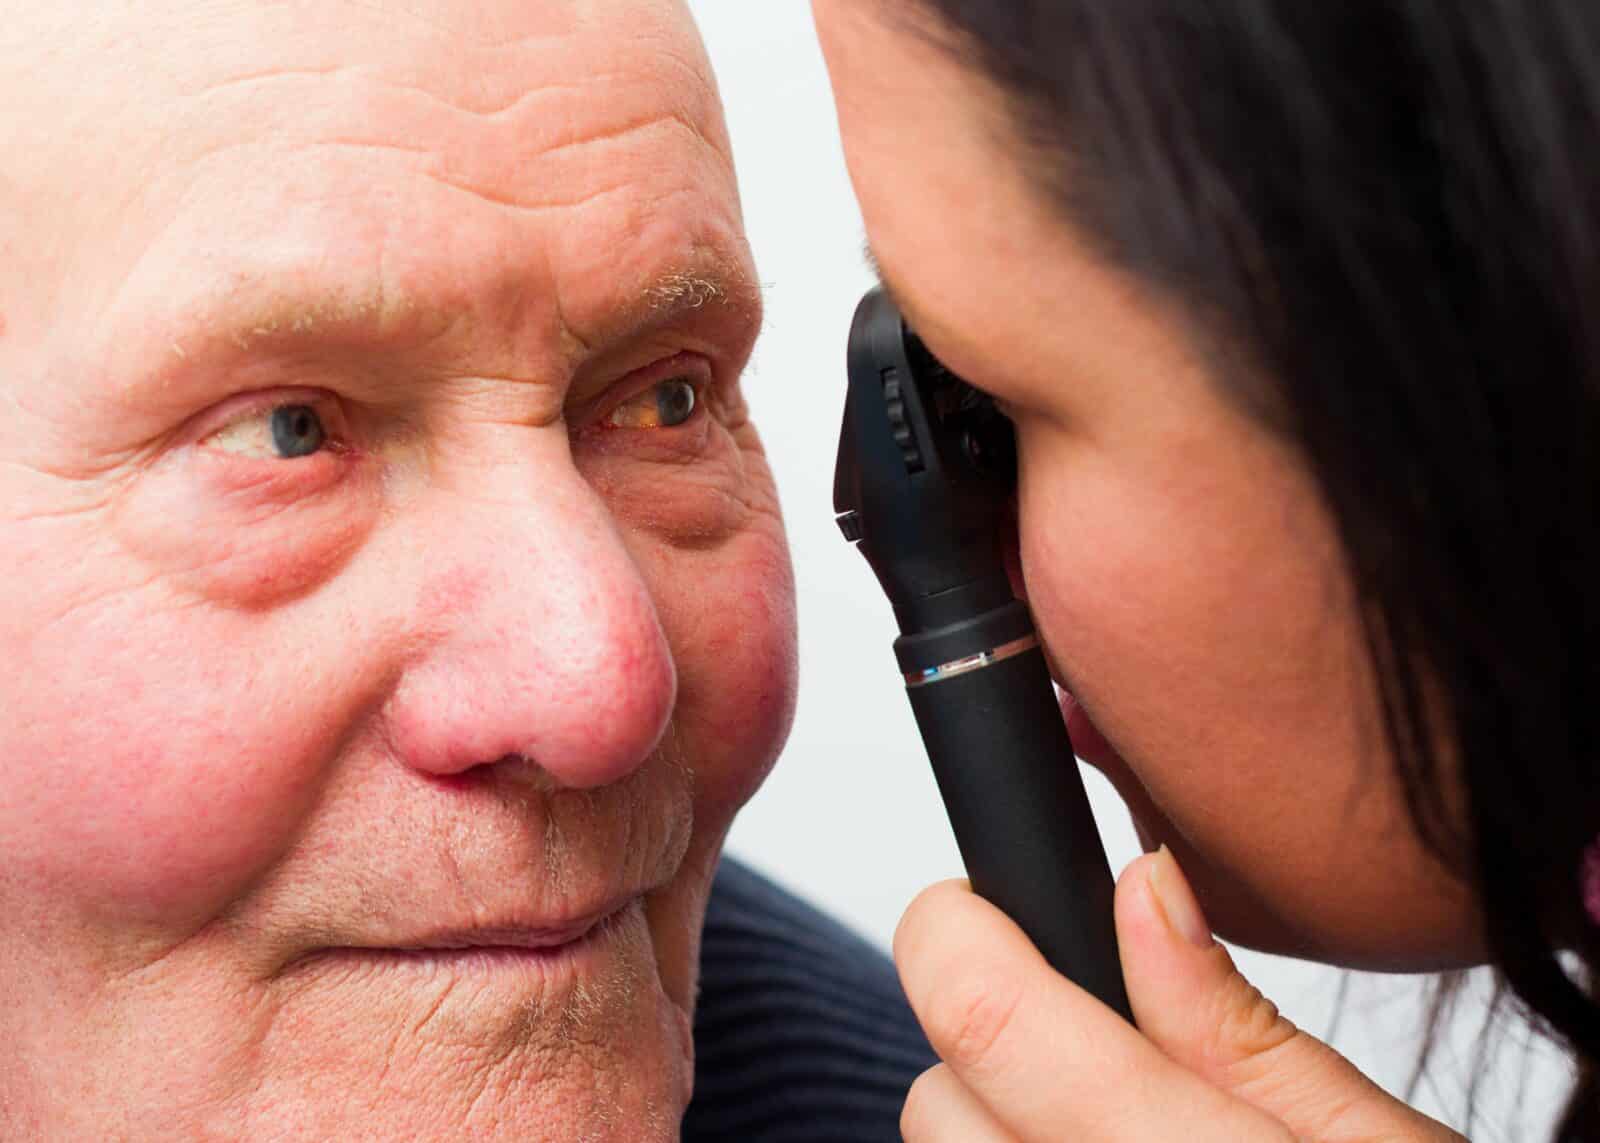 does Medicare cover ear nose and throat doctors?